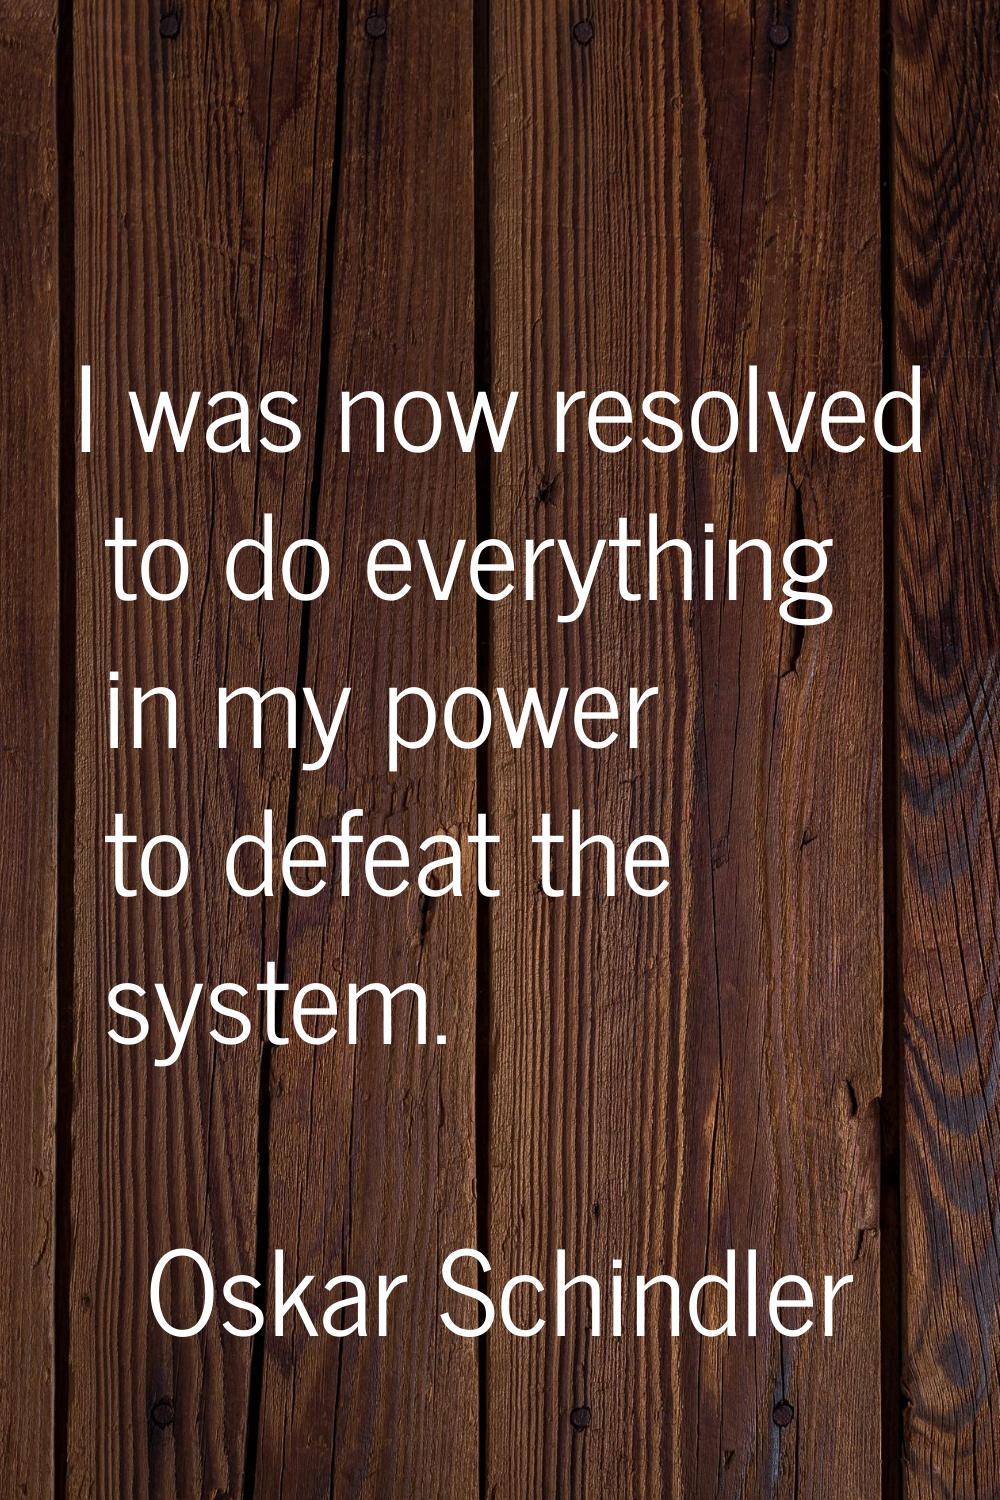 I was now resolved to do everything in my power to defeat the system.